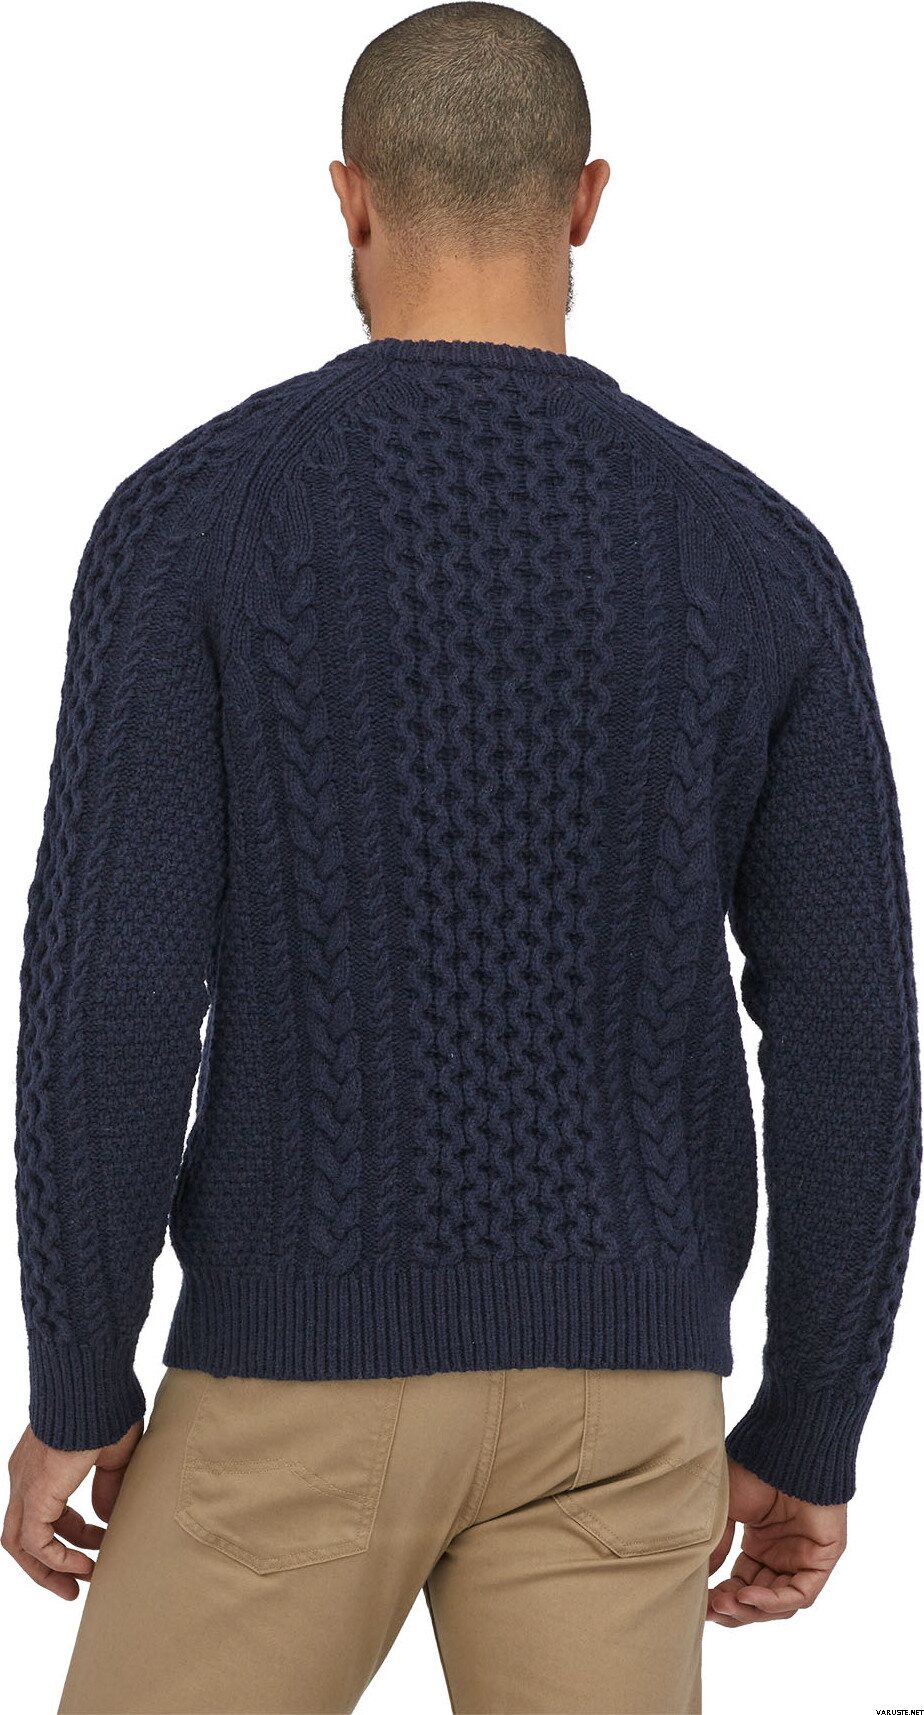 Patagonia Recycled Wool Cable Knit Crewneck Sweater | Sweaters and ...